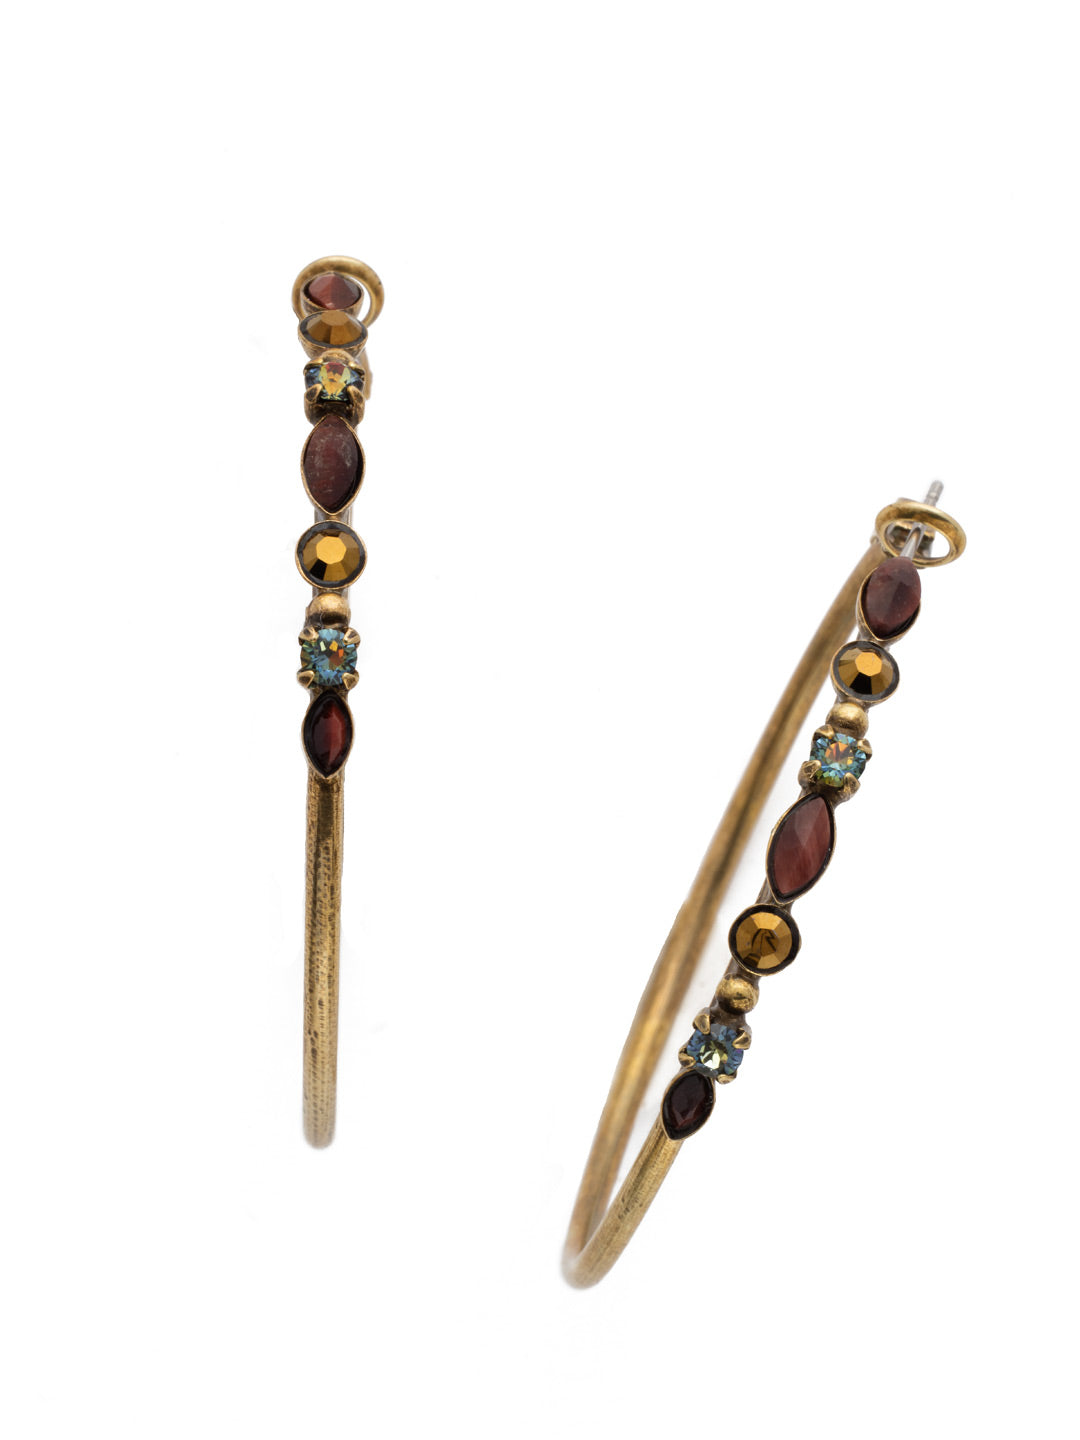 Mixed Media Hoop Earrings - EDK40AGM - Hoop earrings with a line of assorted crystals and semi-precious stones that will add the perfect hint of sparkle to your look.